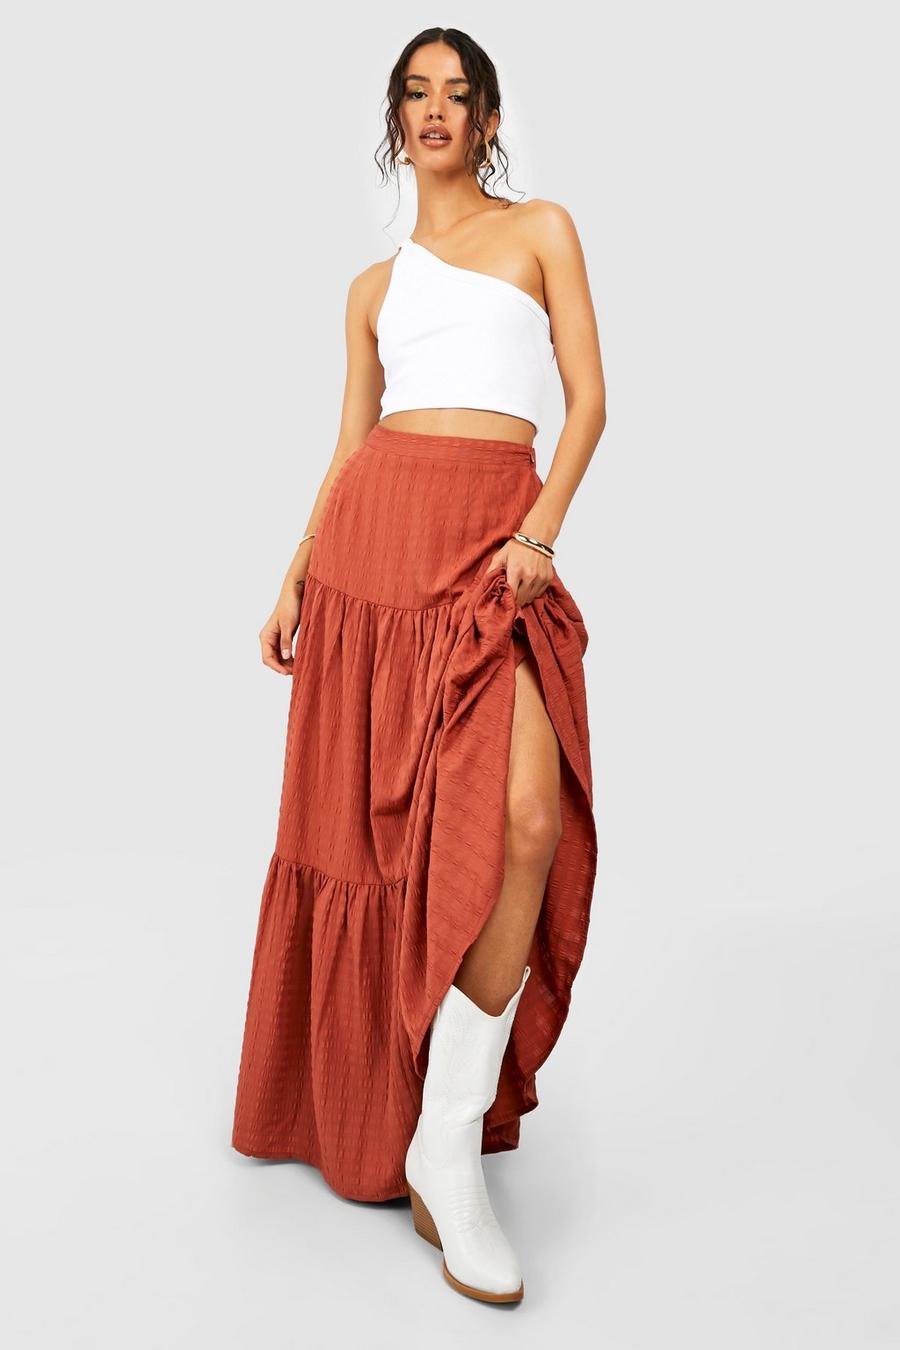 ShomPort Womens High Waist Skirts for Summer 2023 Casual A-Line Midi Skirts  Knee Length Solid Color Long Skirts (Large, Wine) 